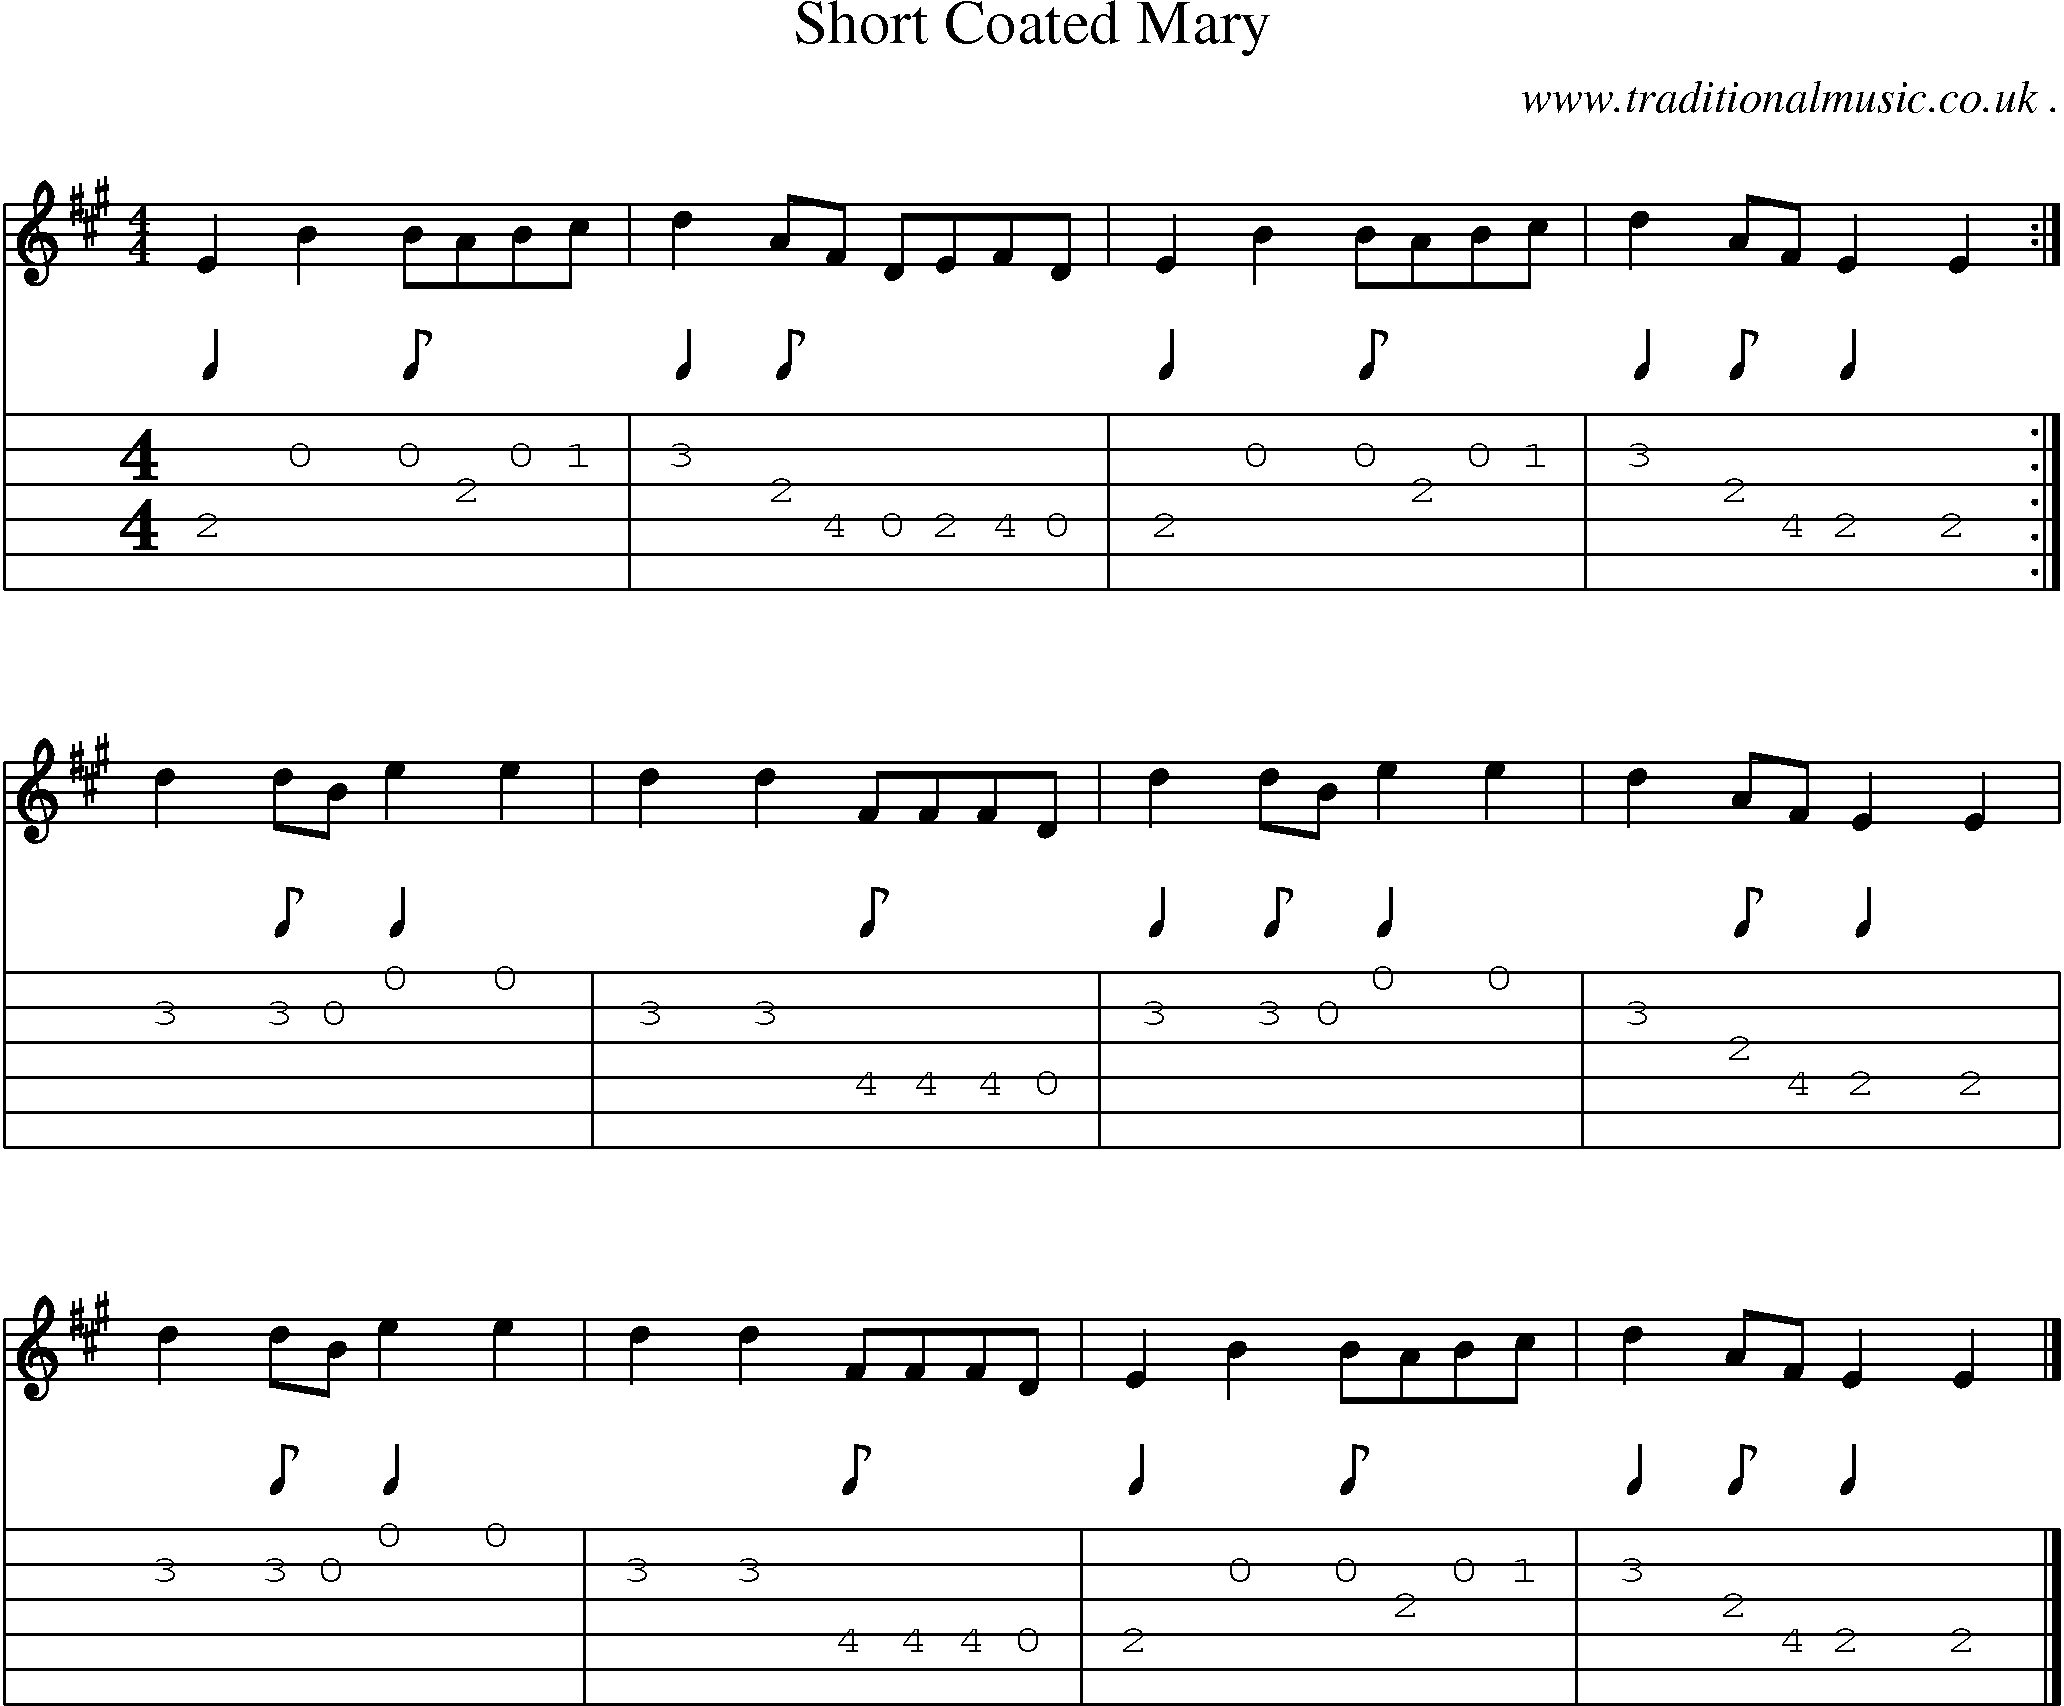 Sheet-music  score, Chords and Guitar Tabs for Short Coated Mary